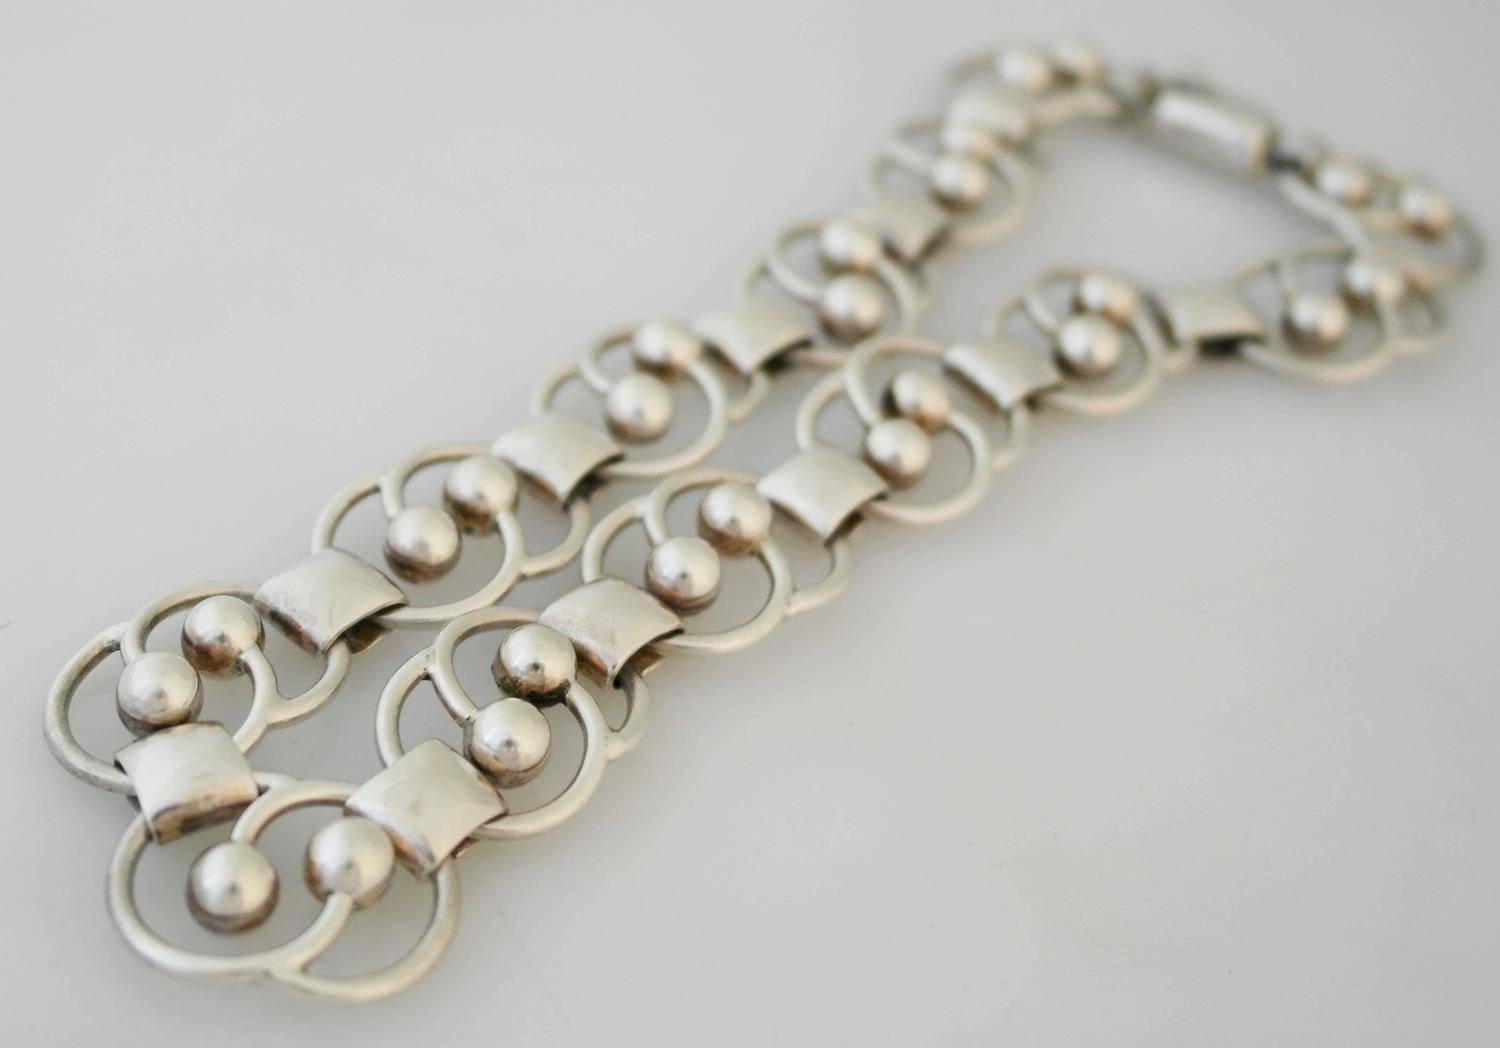 Being offered is a circa 1955 sterling silver necklace by Hector Aguilar of Taxco, Mexico. Comprising intertwining circular links with beaded silver motifs; tongue & box closure. Dimensions: 1/2" wide x 15" wearable length. Marked as